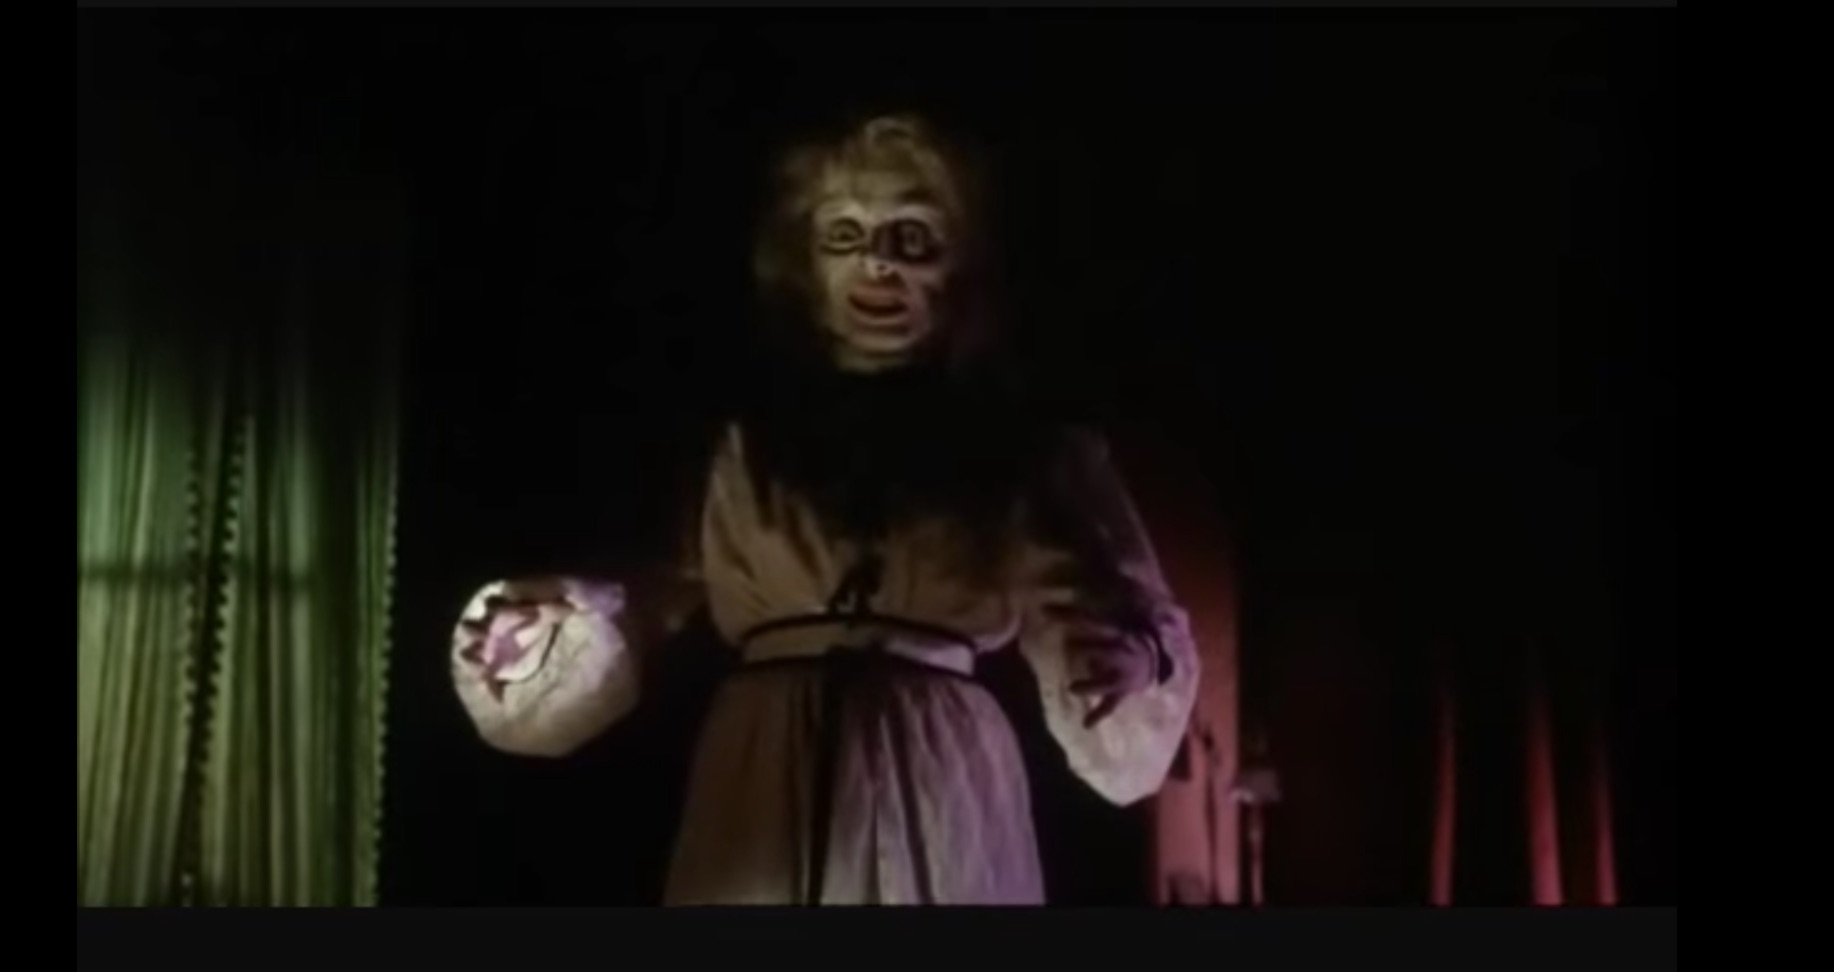 scene from the 1963 horror film "Black Sabbath." It depicts a walking corpse, its face wrinkled, eyes widened and with a sinister grin on its face, walking with outstretched arms toward an unseen victim. It is the corpse of a woman wearing an early 20th century dressing gown in which she died, and is now back for revenge on the woman who stole the ring off her finger.